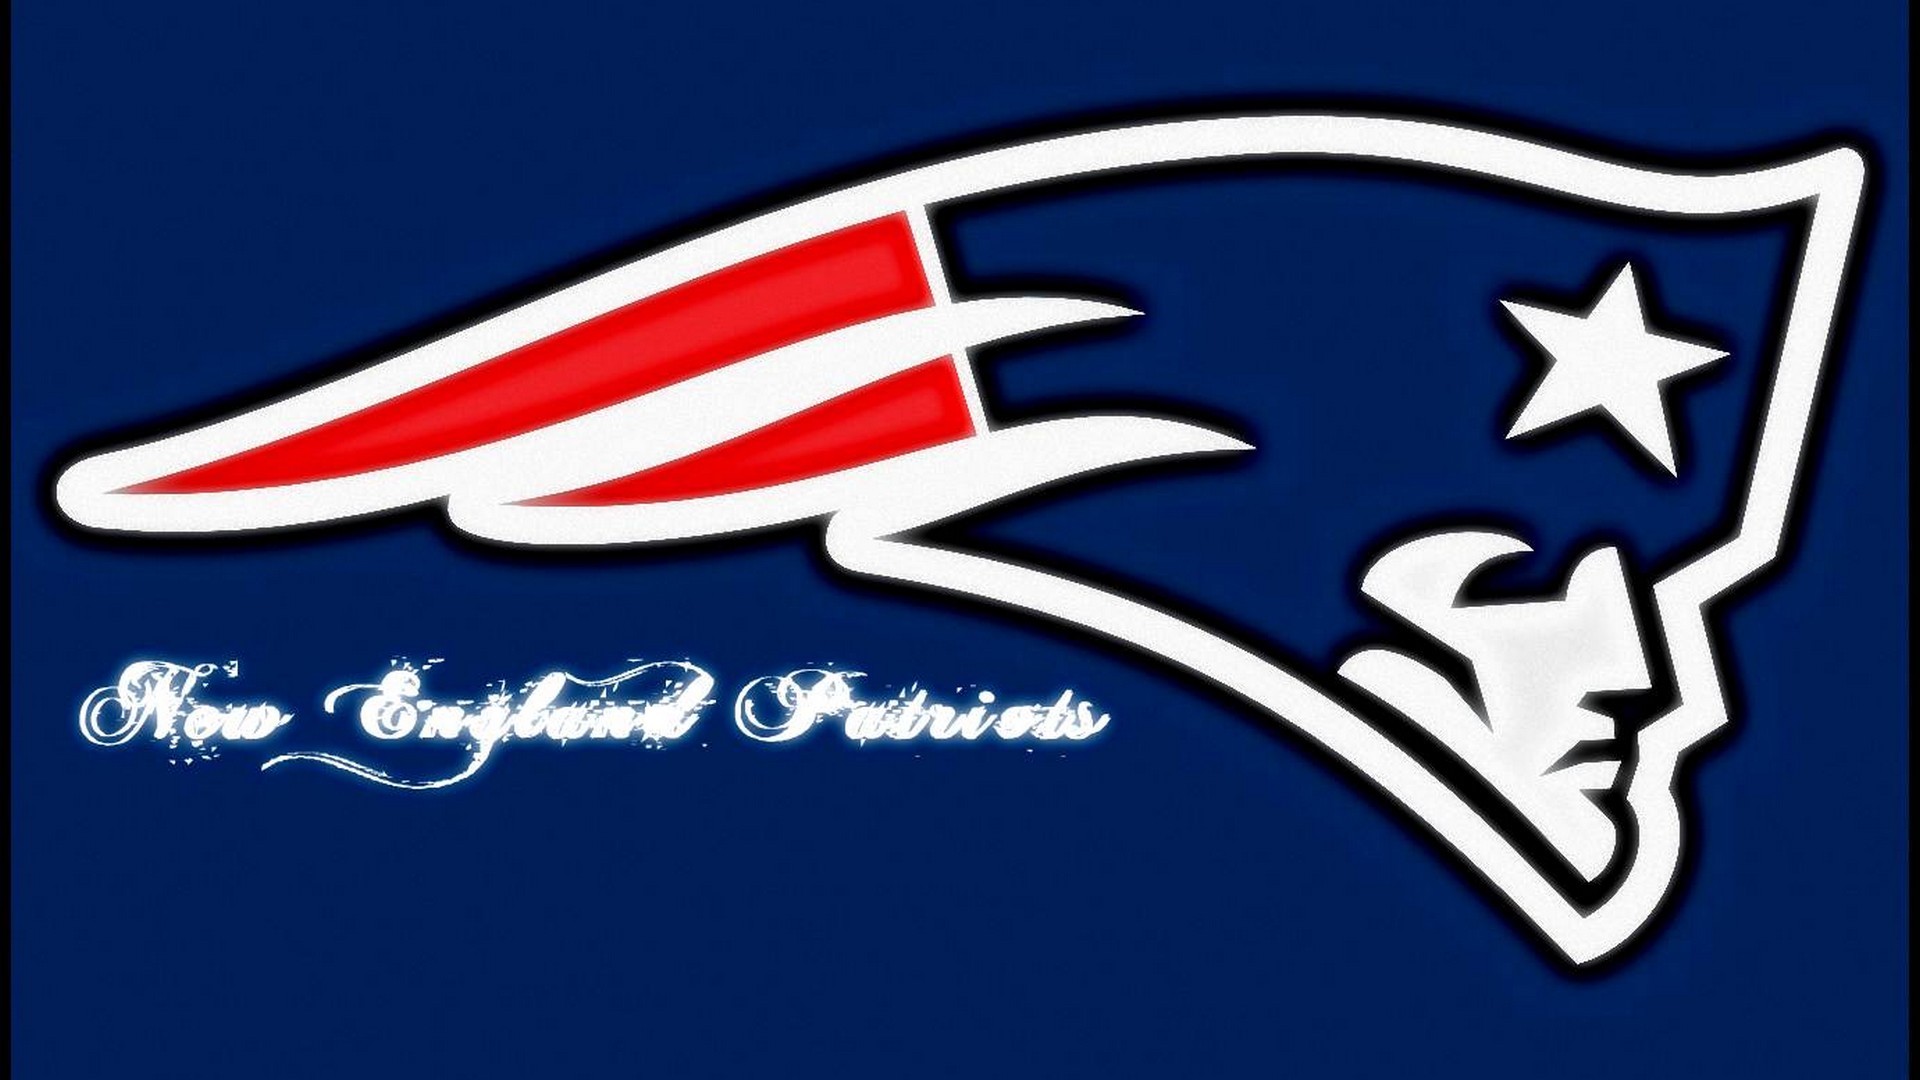 1920x1080 New England Patriots Desktop Wallpaper with resolution  pixel. You  can make this wallpaper for